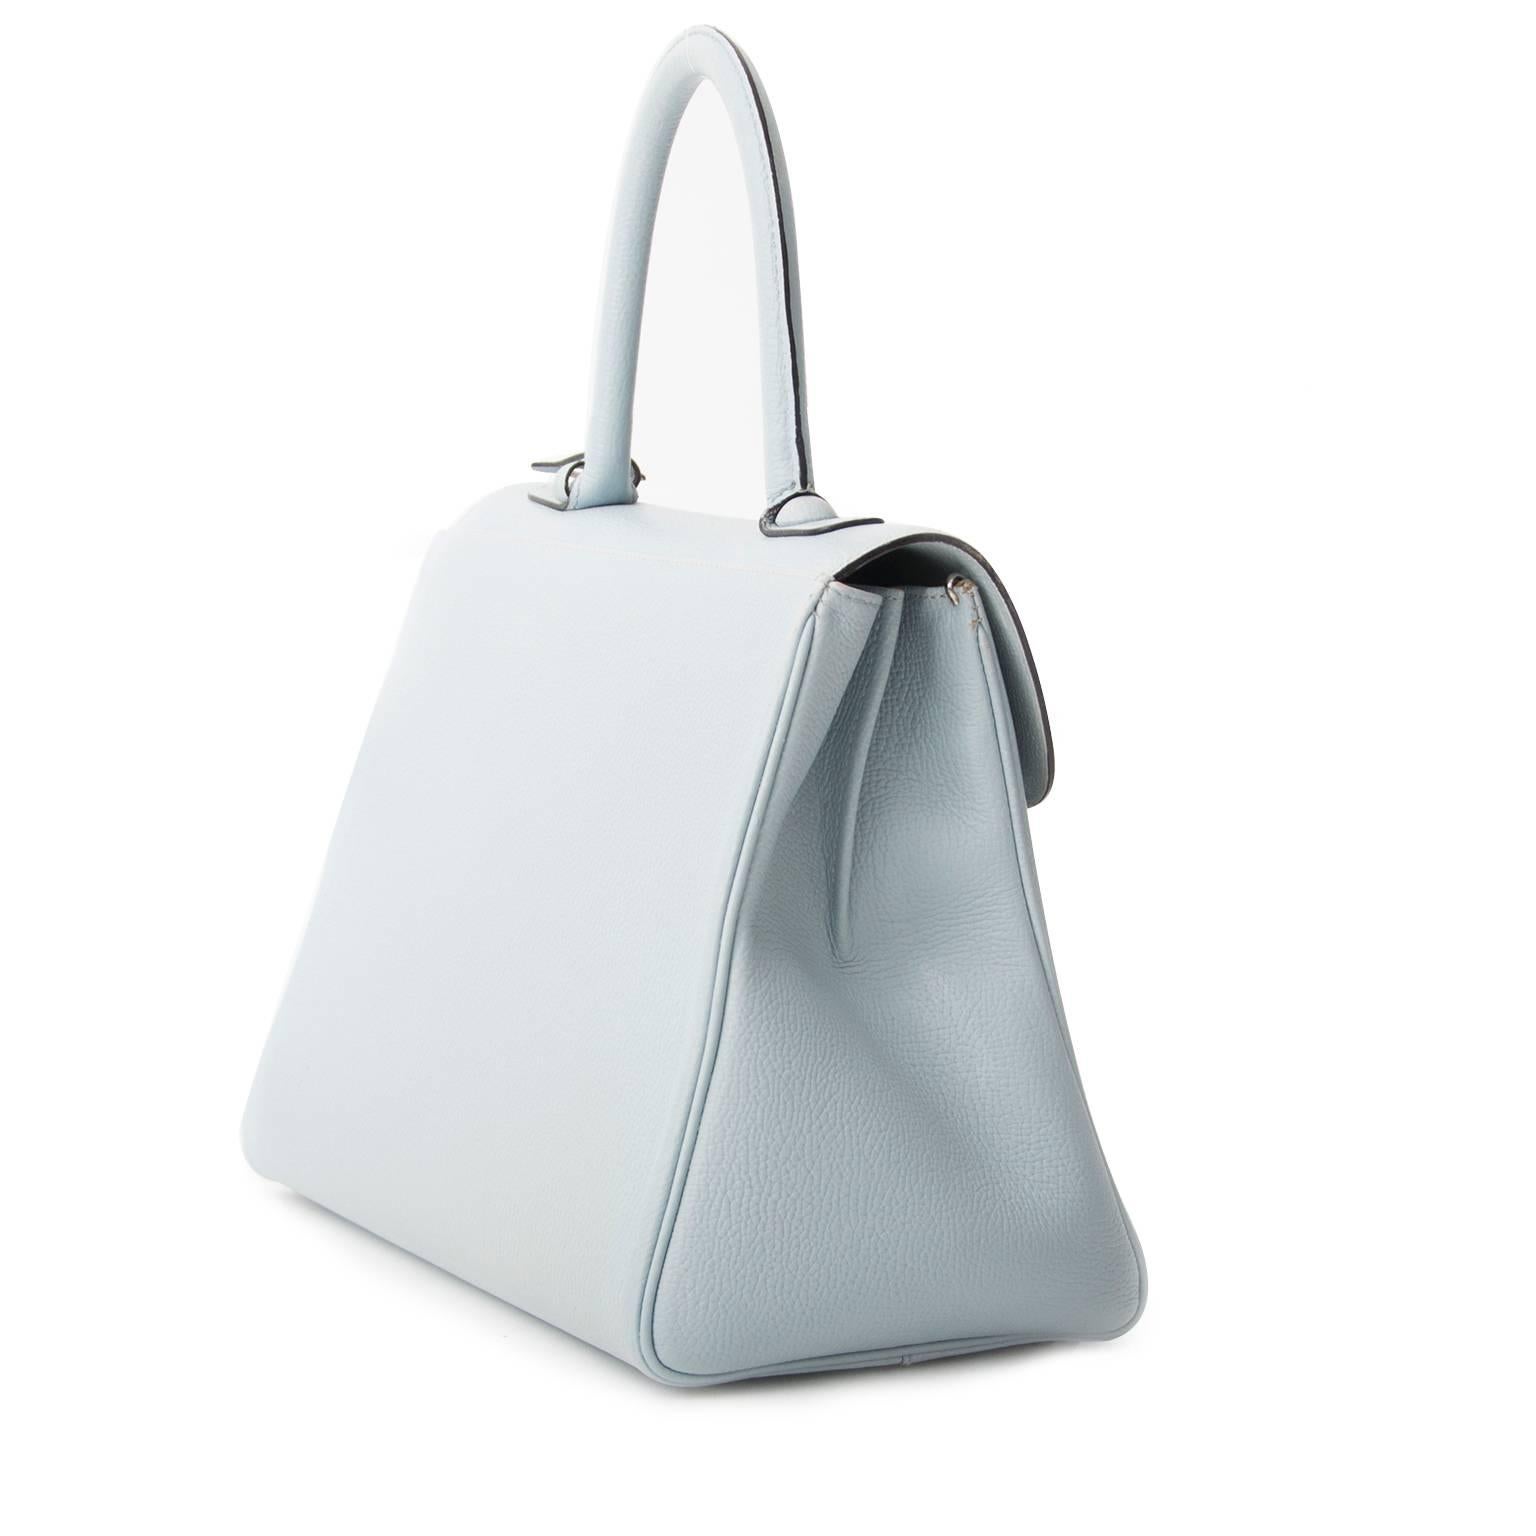 Delvaux Light Blue Brillant in grained leather.
This beautiful Brillant bag from Delvaux is a timeless piece perfect for this coming season.
The interior is in soft nude leather and has two pockets one with a zipper and one without.